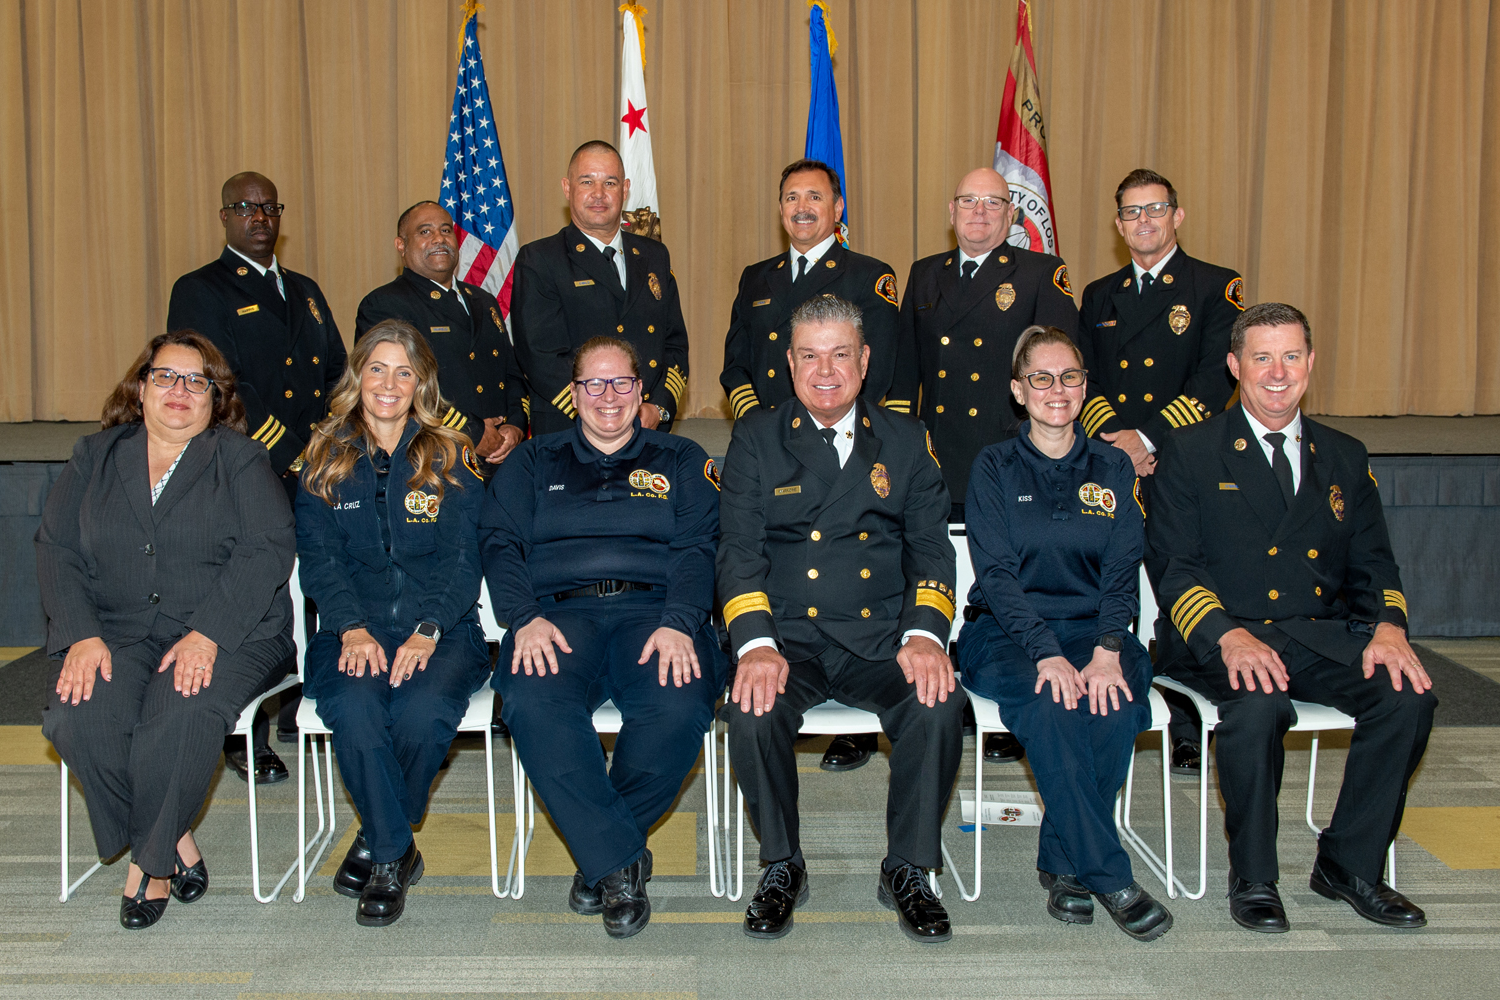 The Los Angeles County Fire Department (LACoFD) hosted a Promotional Ceremony on Wednesday, October 19, 2022, at the Rowland Heights Community Center.